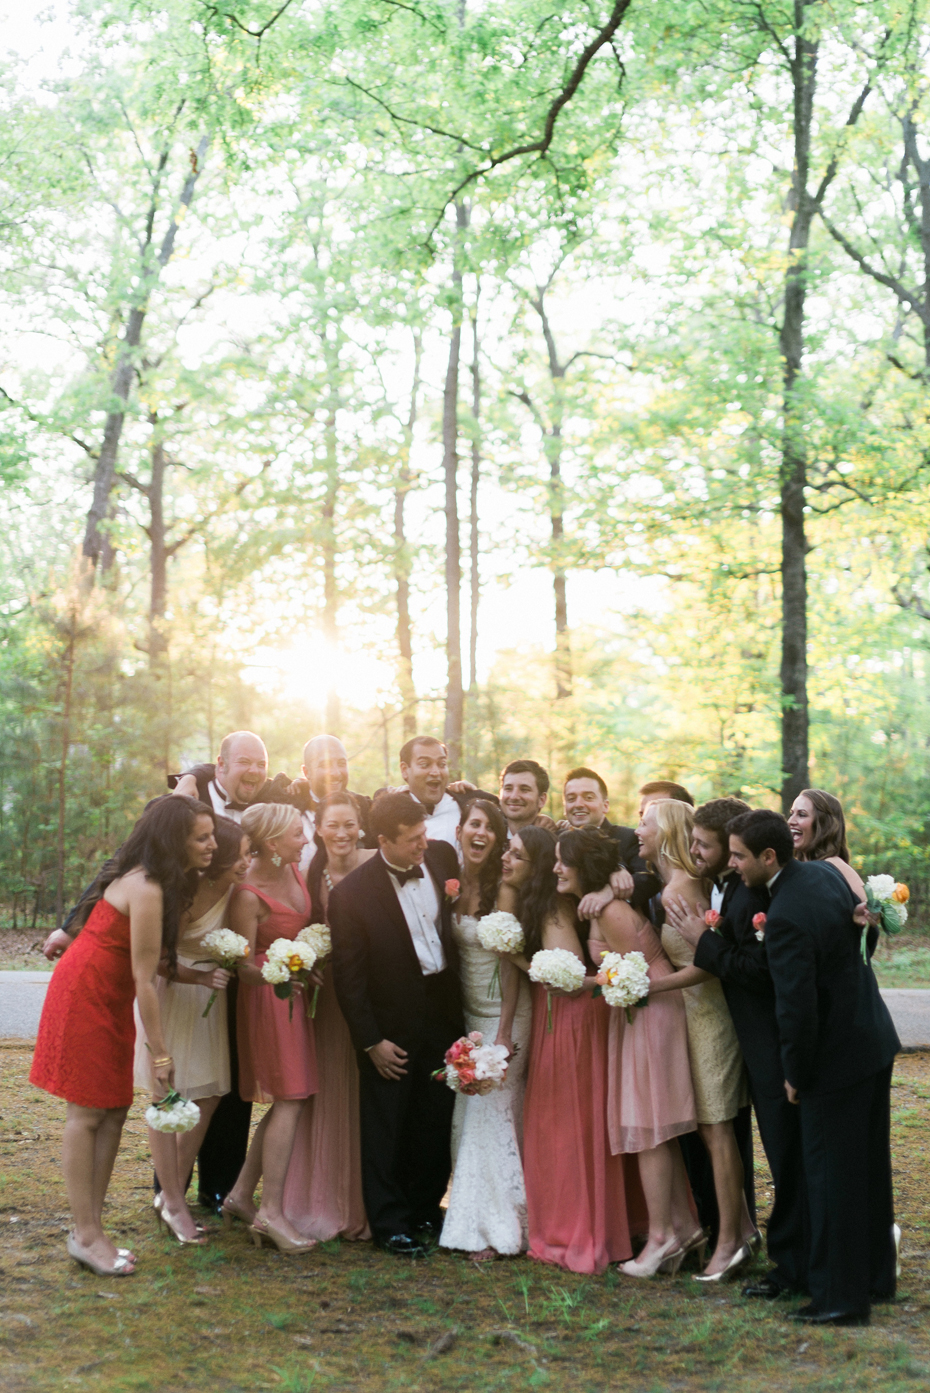 Bridesmaids in mismatched coral dresses and Groomsmen in tuxes and bow ties pose for portraits at the Noland Trail by Virginia Wedding Photographer, Heather Jowett.